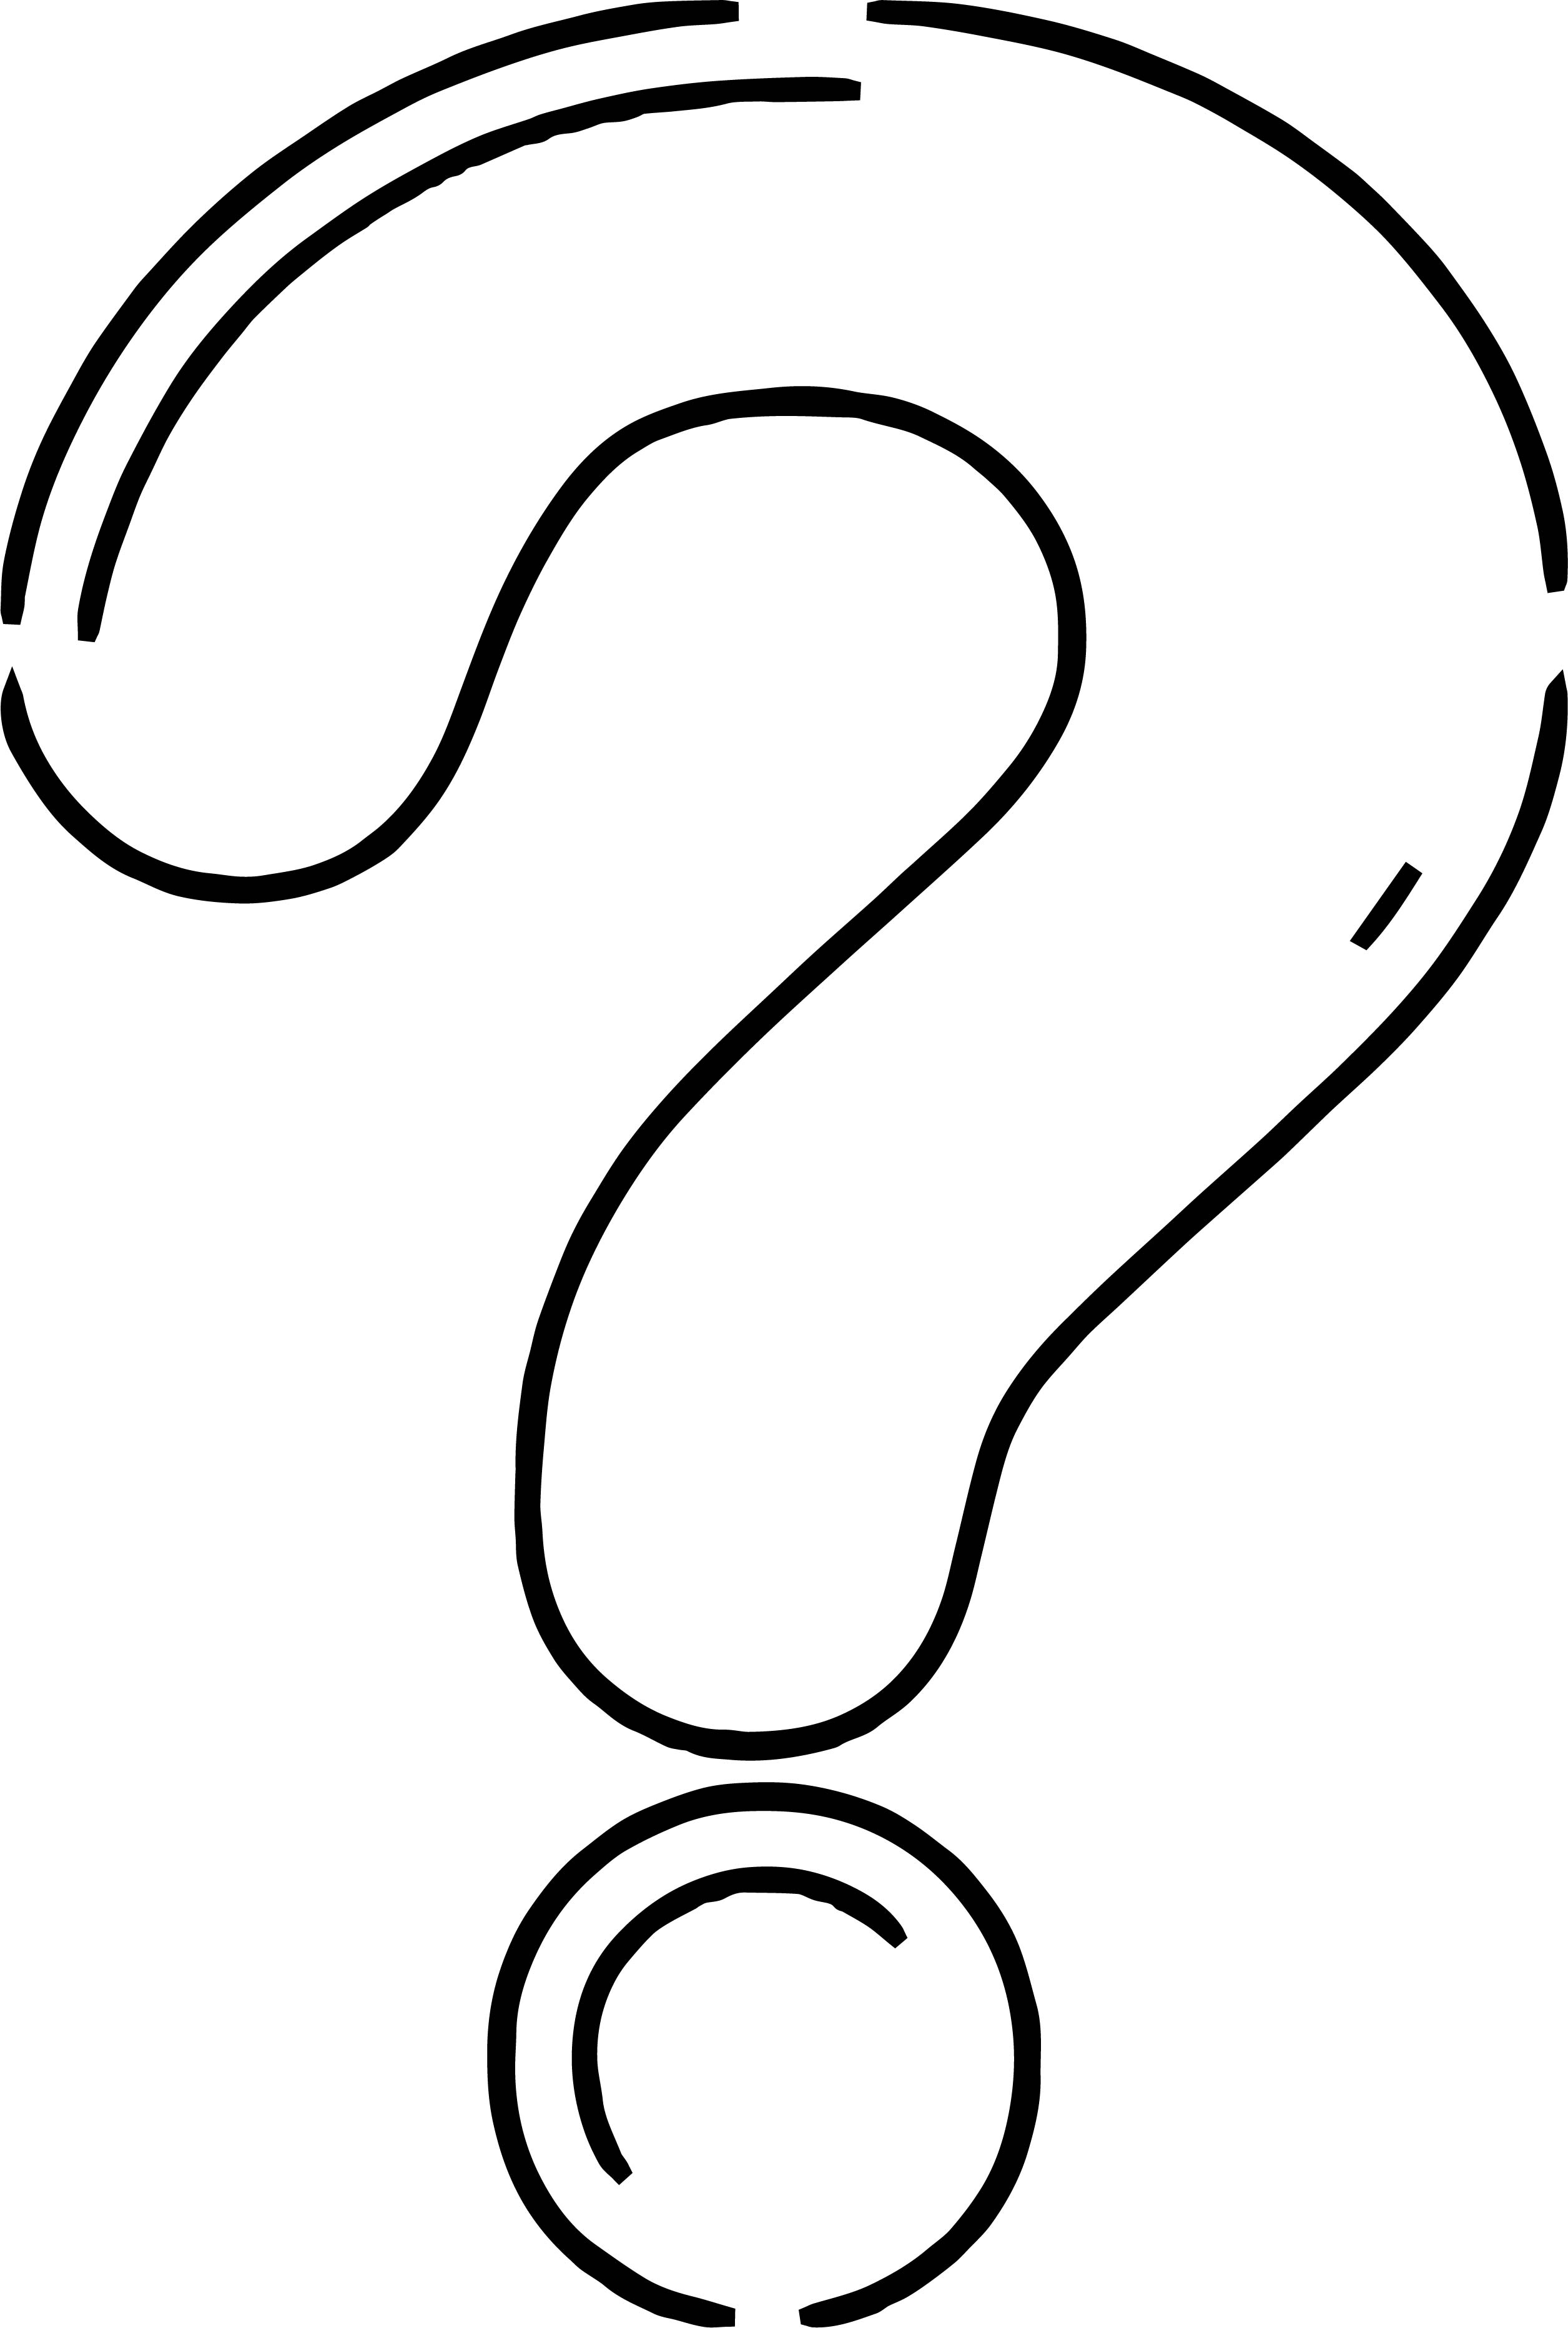 coloring-page-question-mark-free-download-on-clipartmag